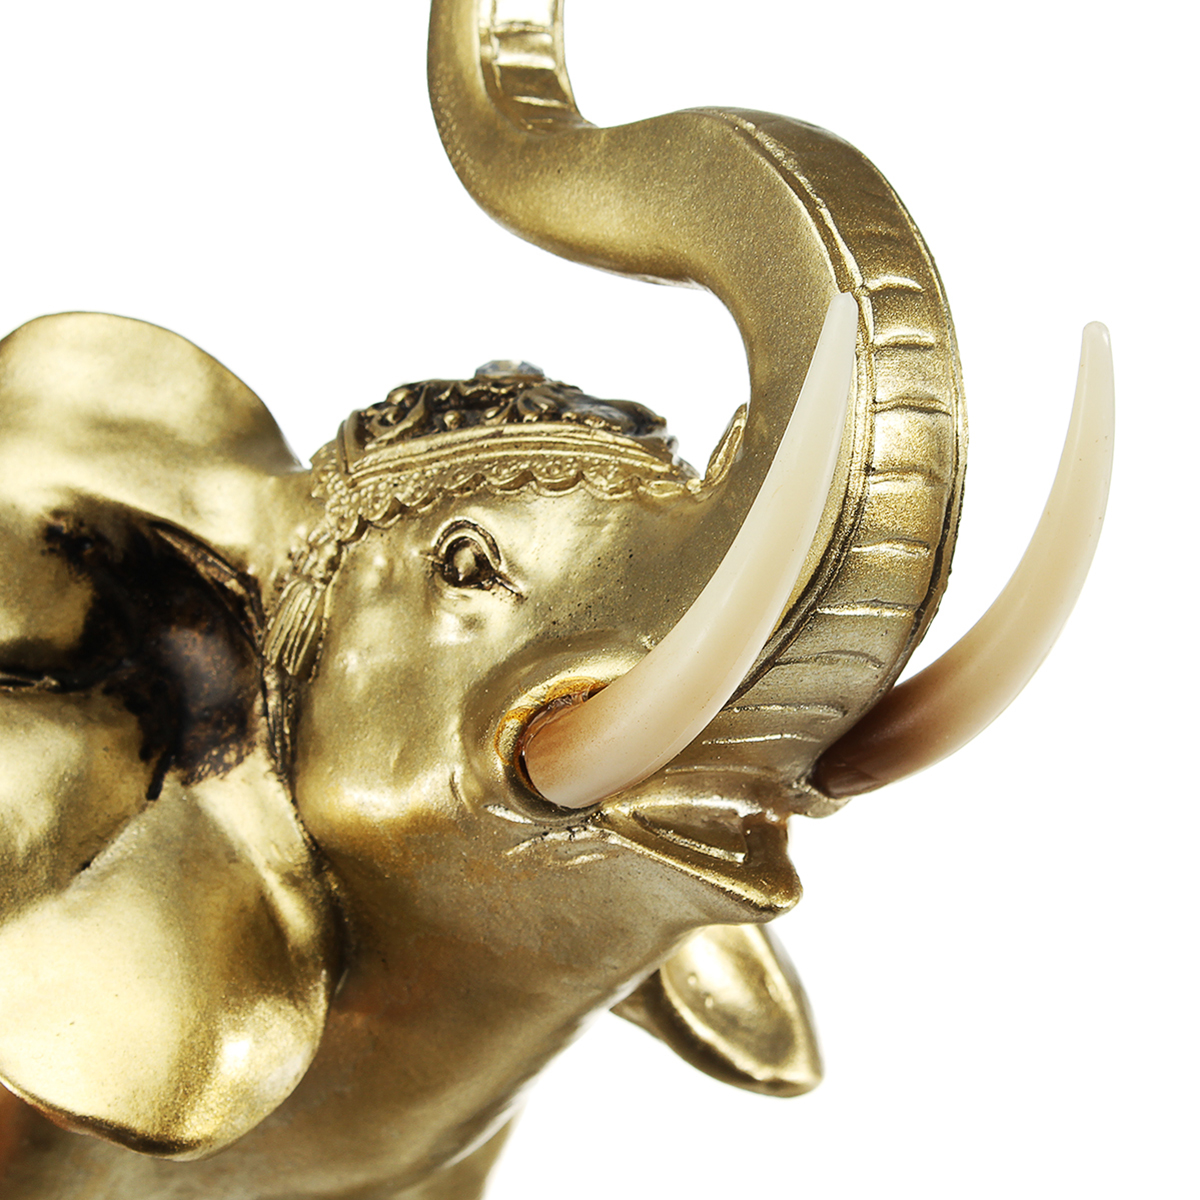 Lucky-Charm-Fengshui-Mascot-Golden-Elephant-Resin-Mini-Statue-Home-Desk-Ornaments-Gifts-Home-Decorat-1634232-10